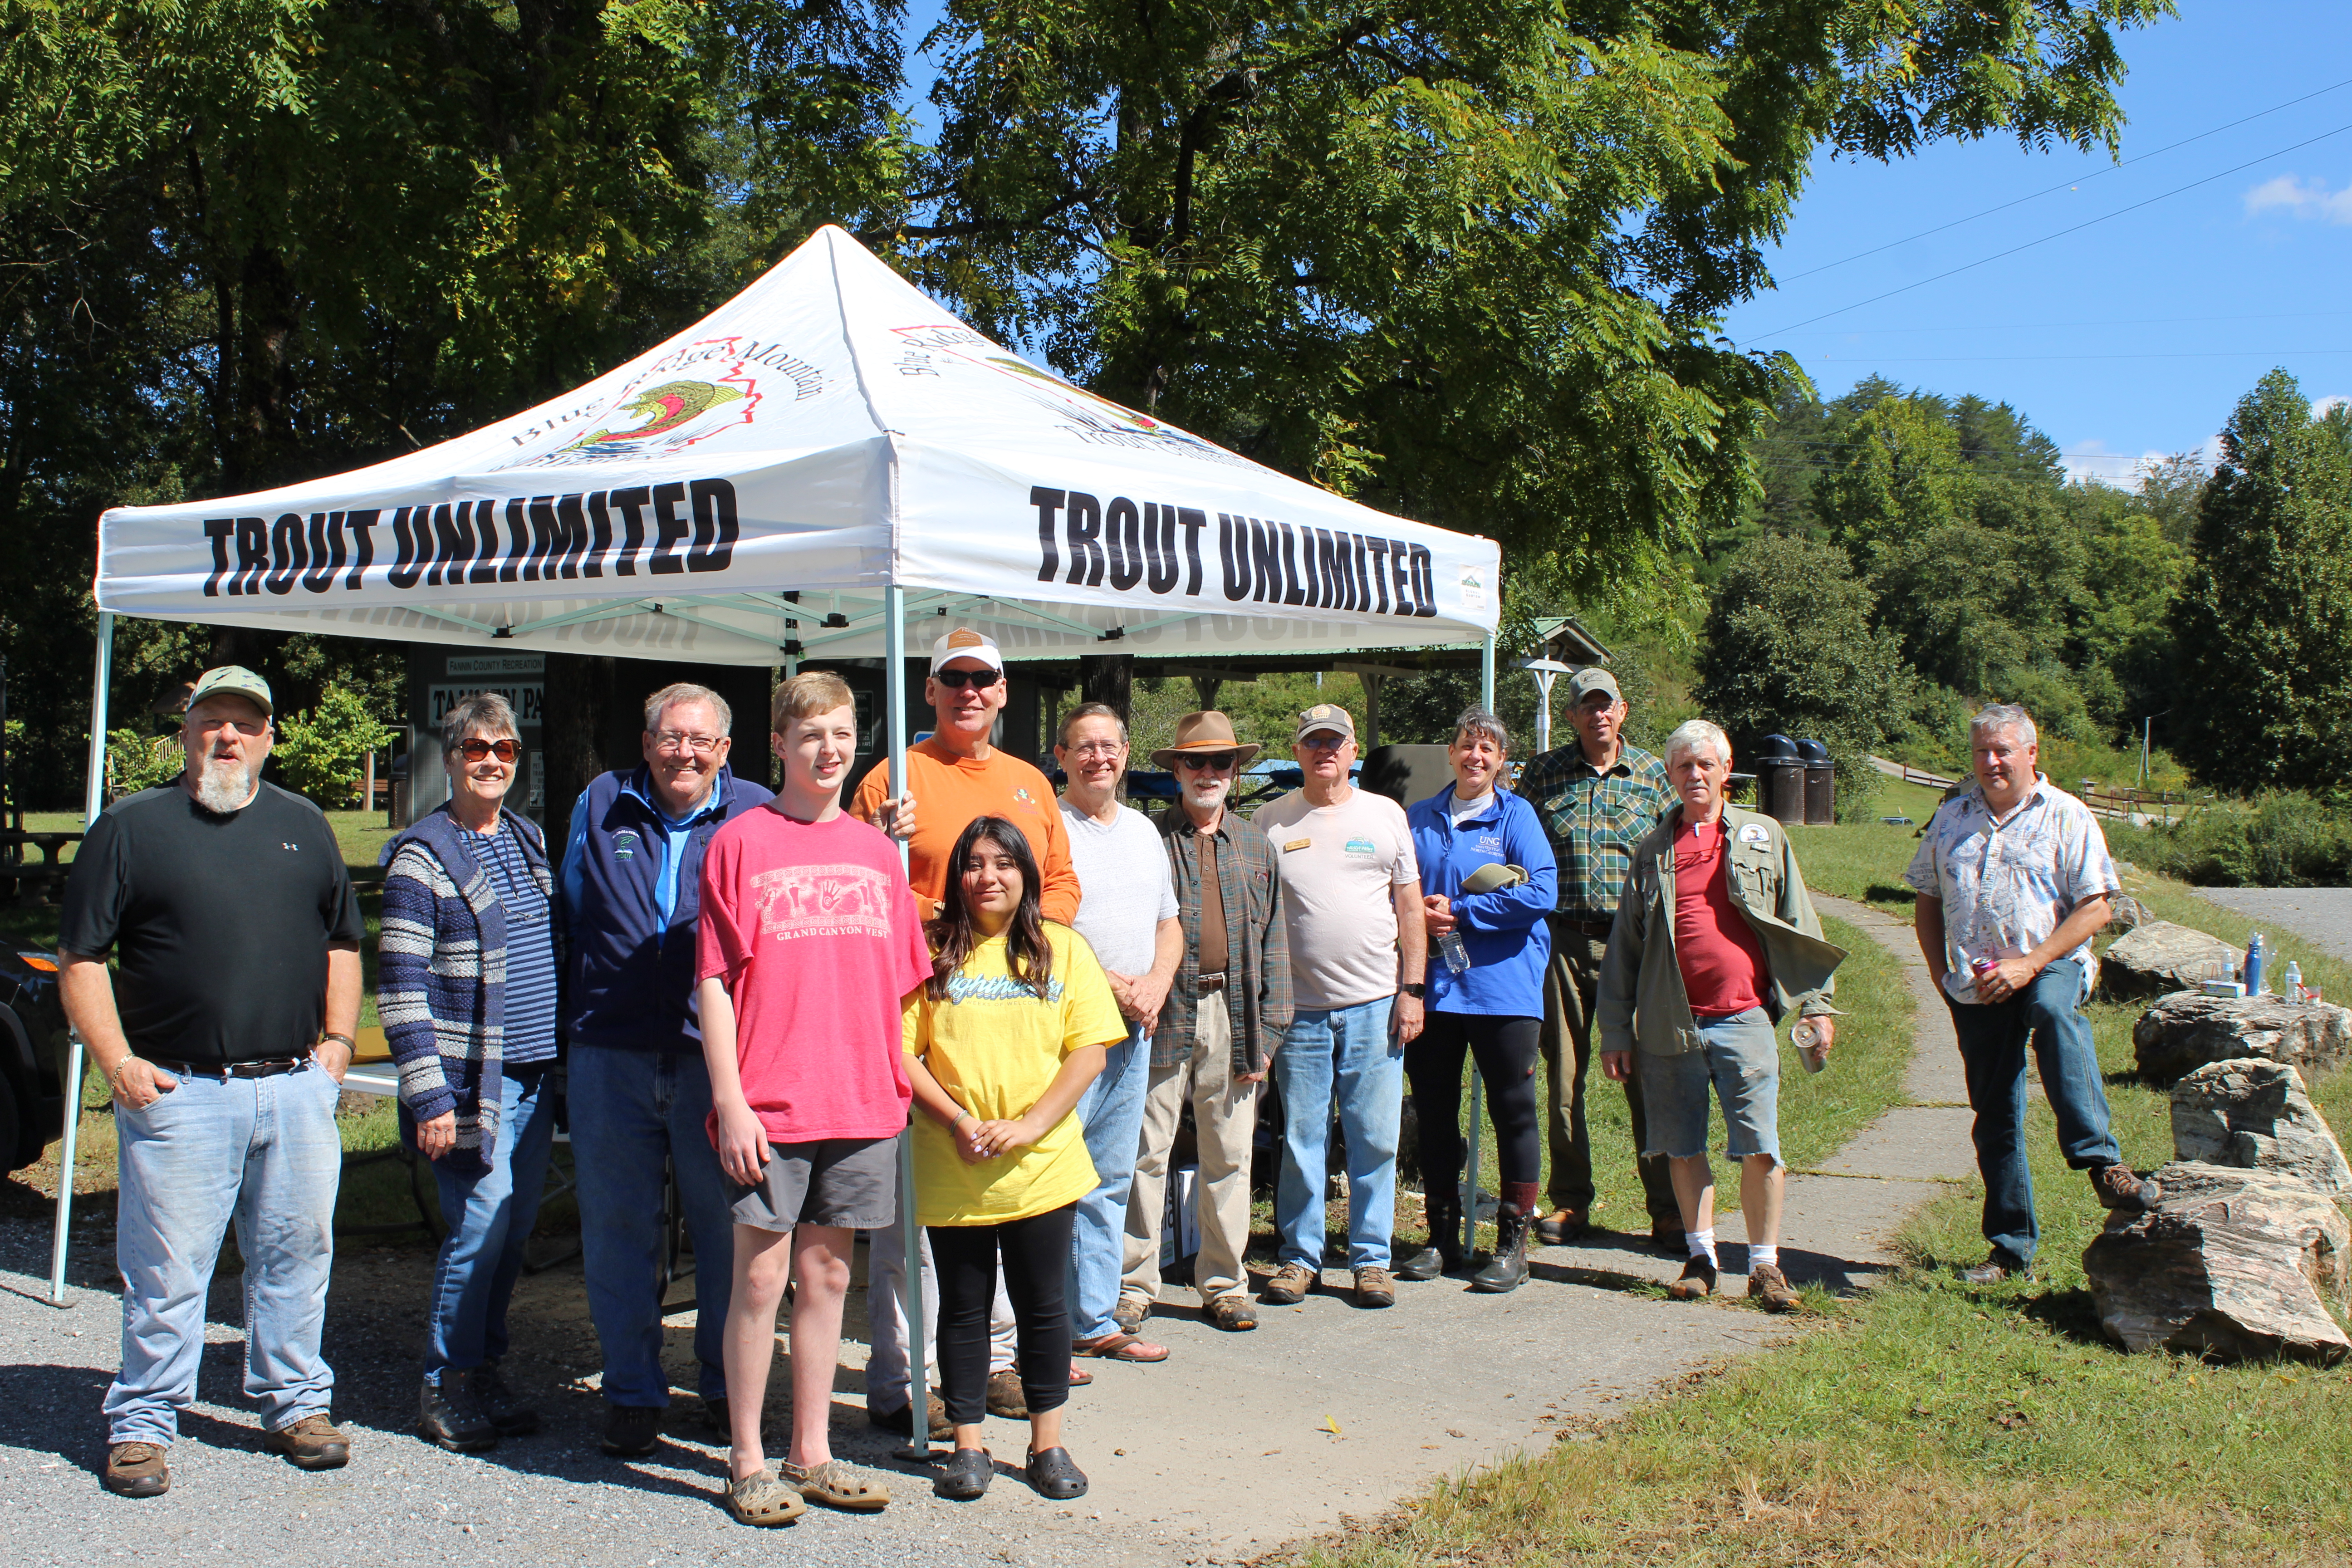 Sixty-seven volunteers collected 1,800 pounds of trash, five tires, a traffic barrel and a freezer during Rivers Alive hosted by Blue Ridge Mountain Trout Unlimited Saturday, September 25. Shown are, from left, Doris Riggs, Carl Riggs, David Britain, Macy Ruiz, Bob Reich, Mike Kapperman, Neil McDonald, John Jenkins, Anna Speesson, Bob Murrah, Sandy Reinauer and Bob Wetzsteon.